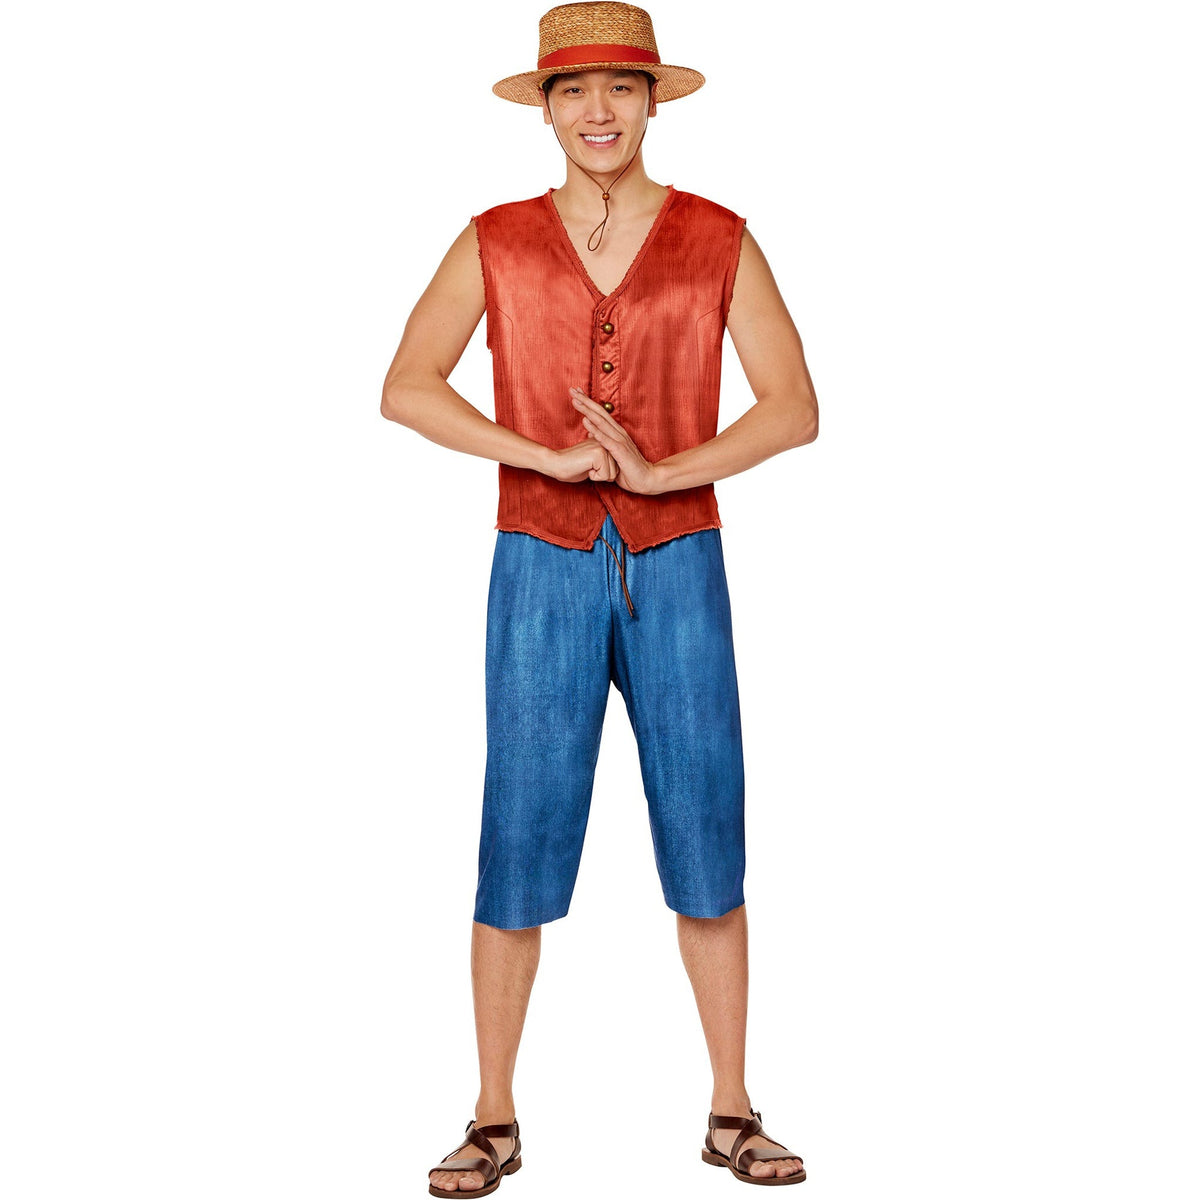 IN SPIRIT DESIGNS Costumes Luffy Costume for Adults, One Piece, Red Vest and Blue Shorts